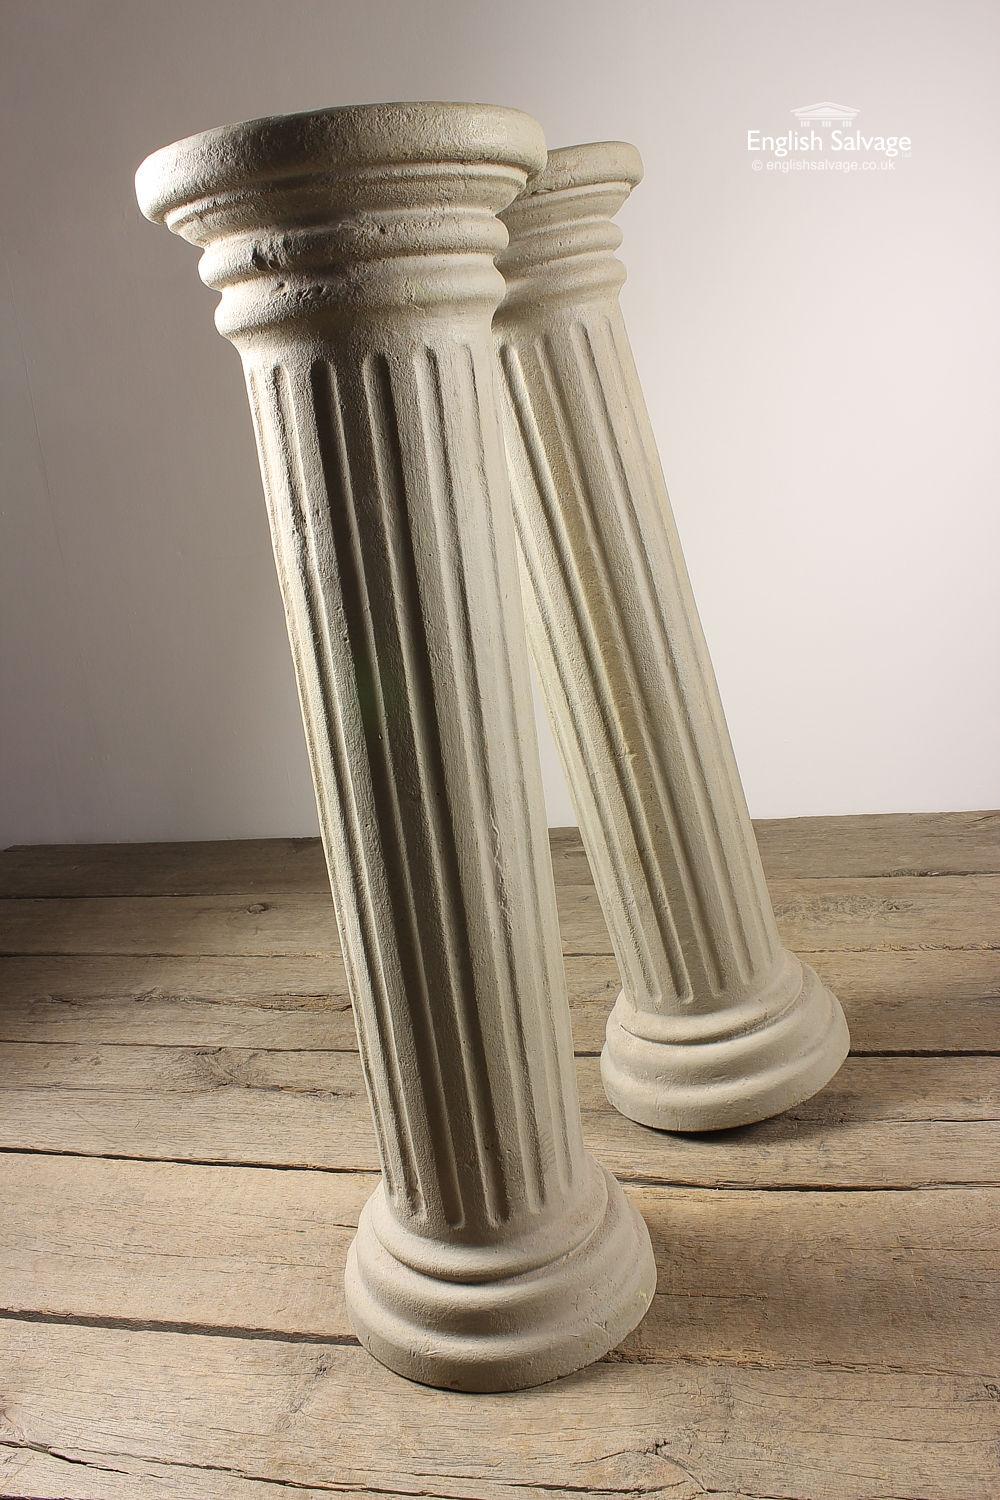 Reclaimed plain circular topped fluted/ribbed painted cast columns / pillars / supports. Ideal for displaying a shrub/plant off and enabling it to drape down pillar, or for housing your favourite ornament.